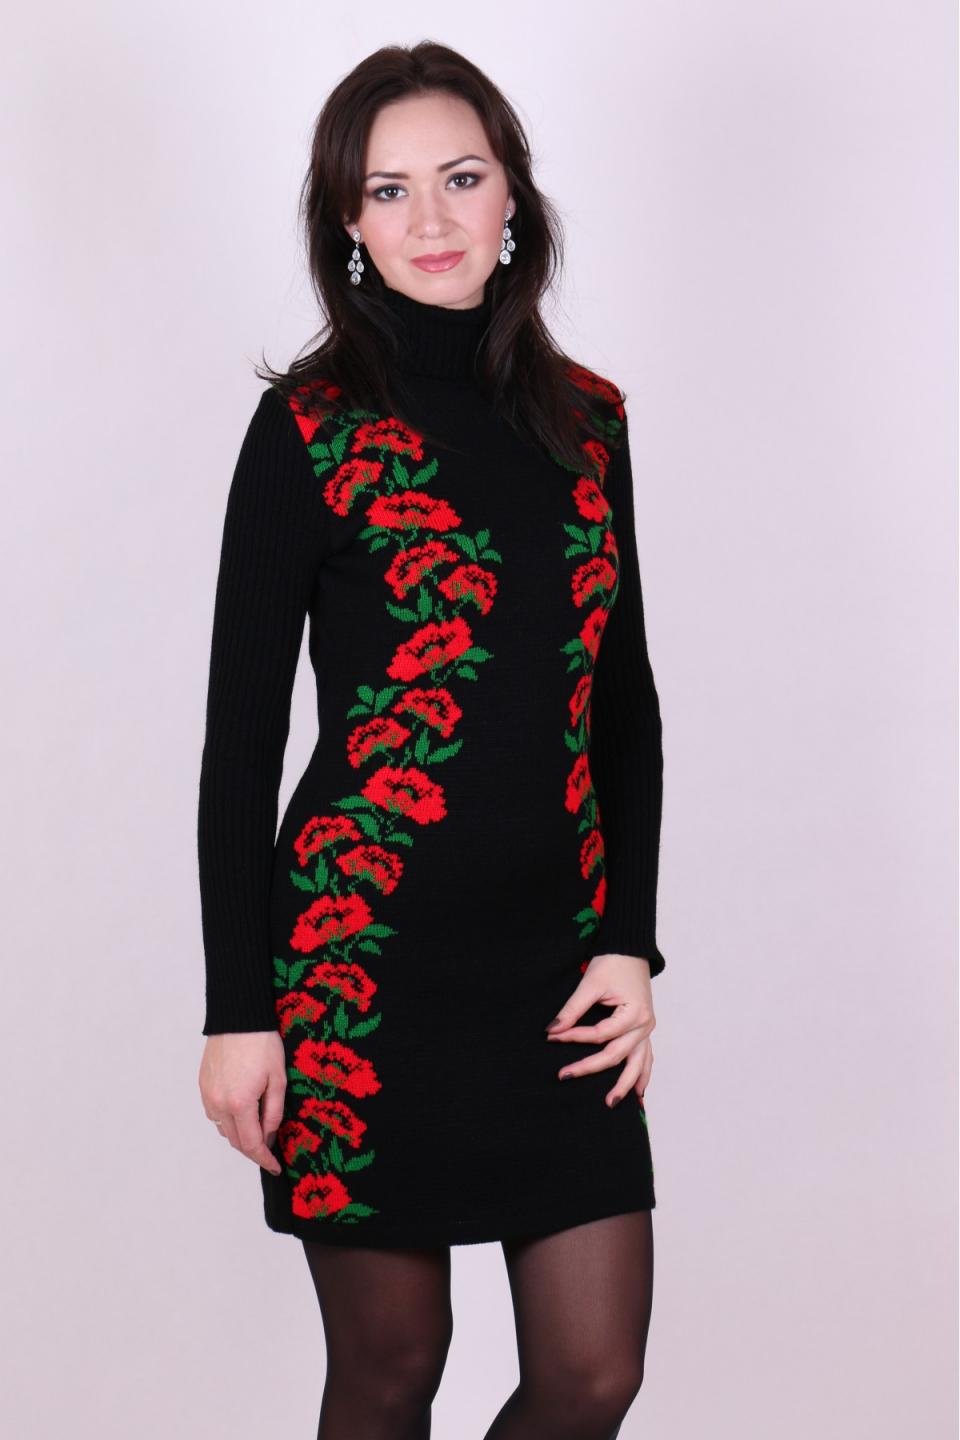 Warm knitted dress &quot;Poppies&quot; (black, red, green)